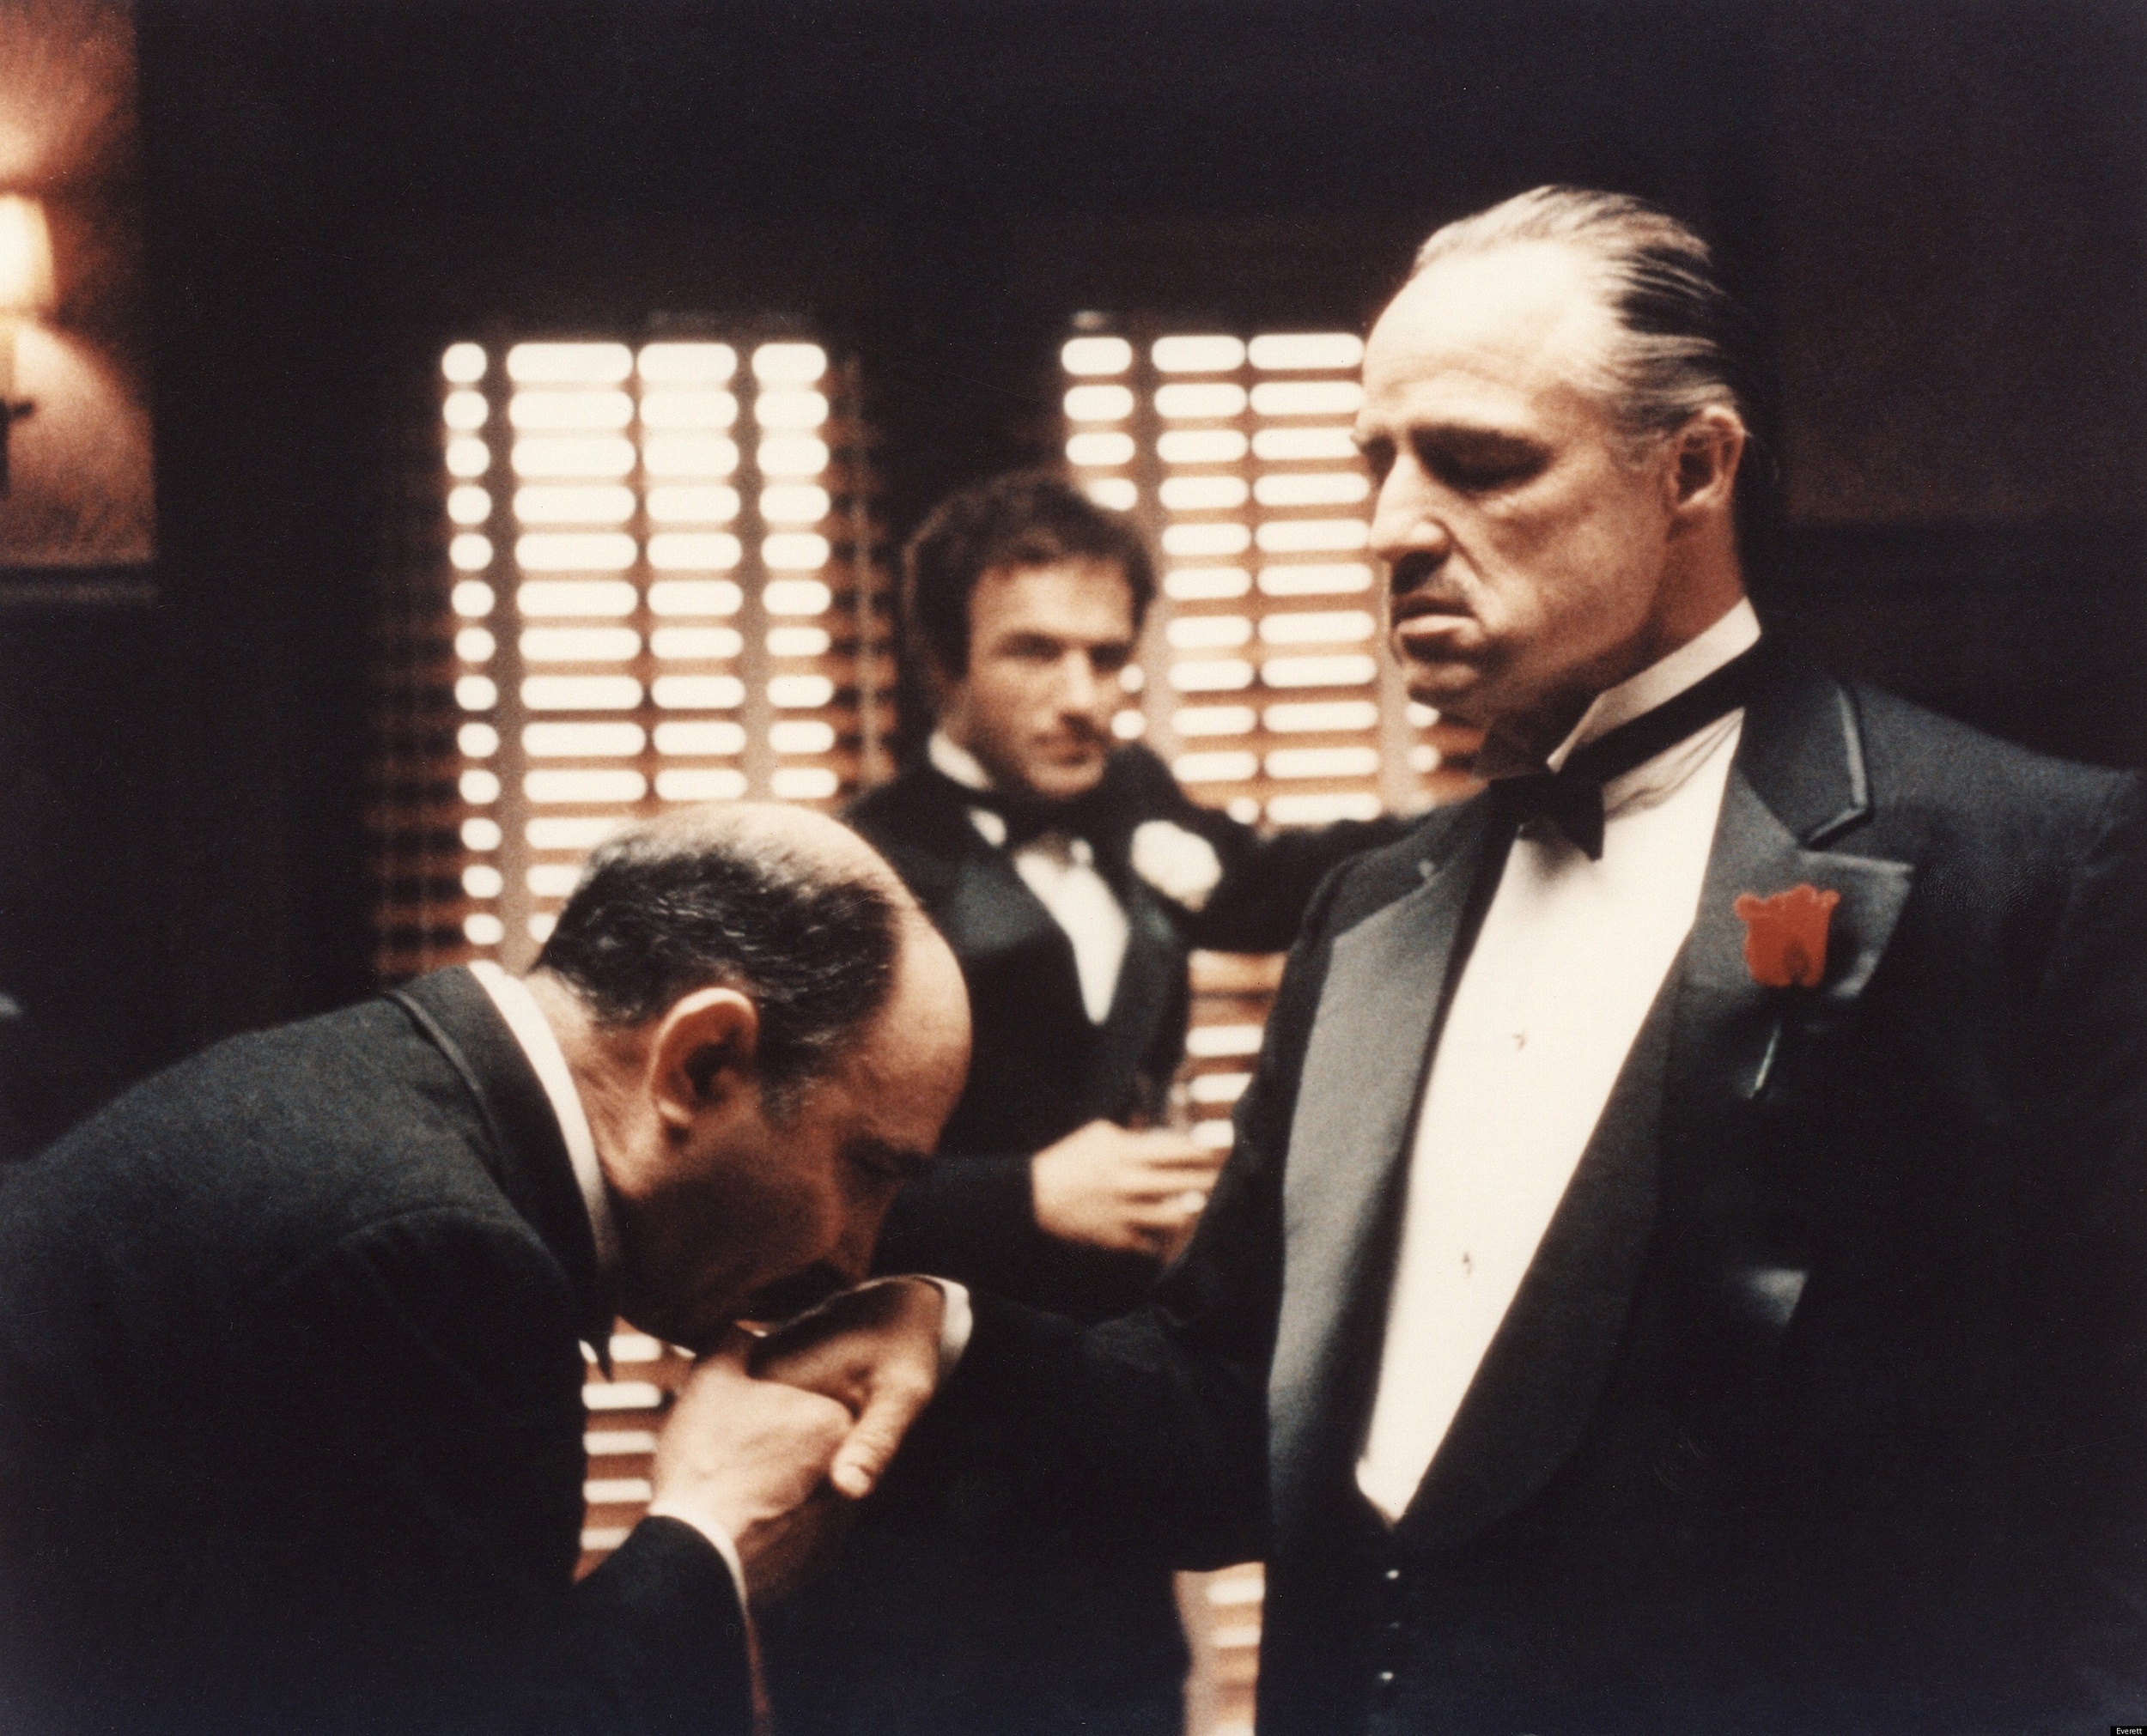 <p>It speaks to the incredible filmmaking of Coppola on <em>The Godfather</em> that the opening line can be so iconic but also spoken by a character who is truly tertiary to the story. He is a man who has come to Vito Corleone on the day of his daughter’s wedding, looking for a favor. This man, Amerigo Bonasara, is a sliver of this all-time film, but he arguably speaks as thematically resonant a line as anybody: “I believe in America. America has made my fortune.”</p><p><a href='https://www.msn.com/en-us/community/channel/vid-cj9pqbr0vn9in2b6ddcd8sfgpfq6x6utp44fssrv6mc2gtybw0us'>Follow us on MSN to see more of our exclusive entertainment content.</a></p>